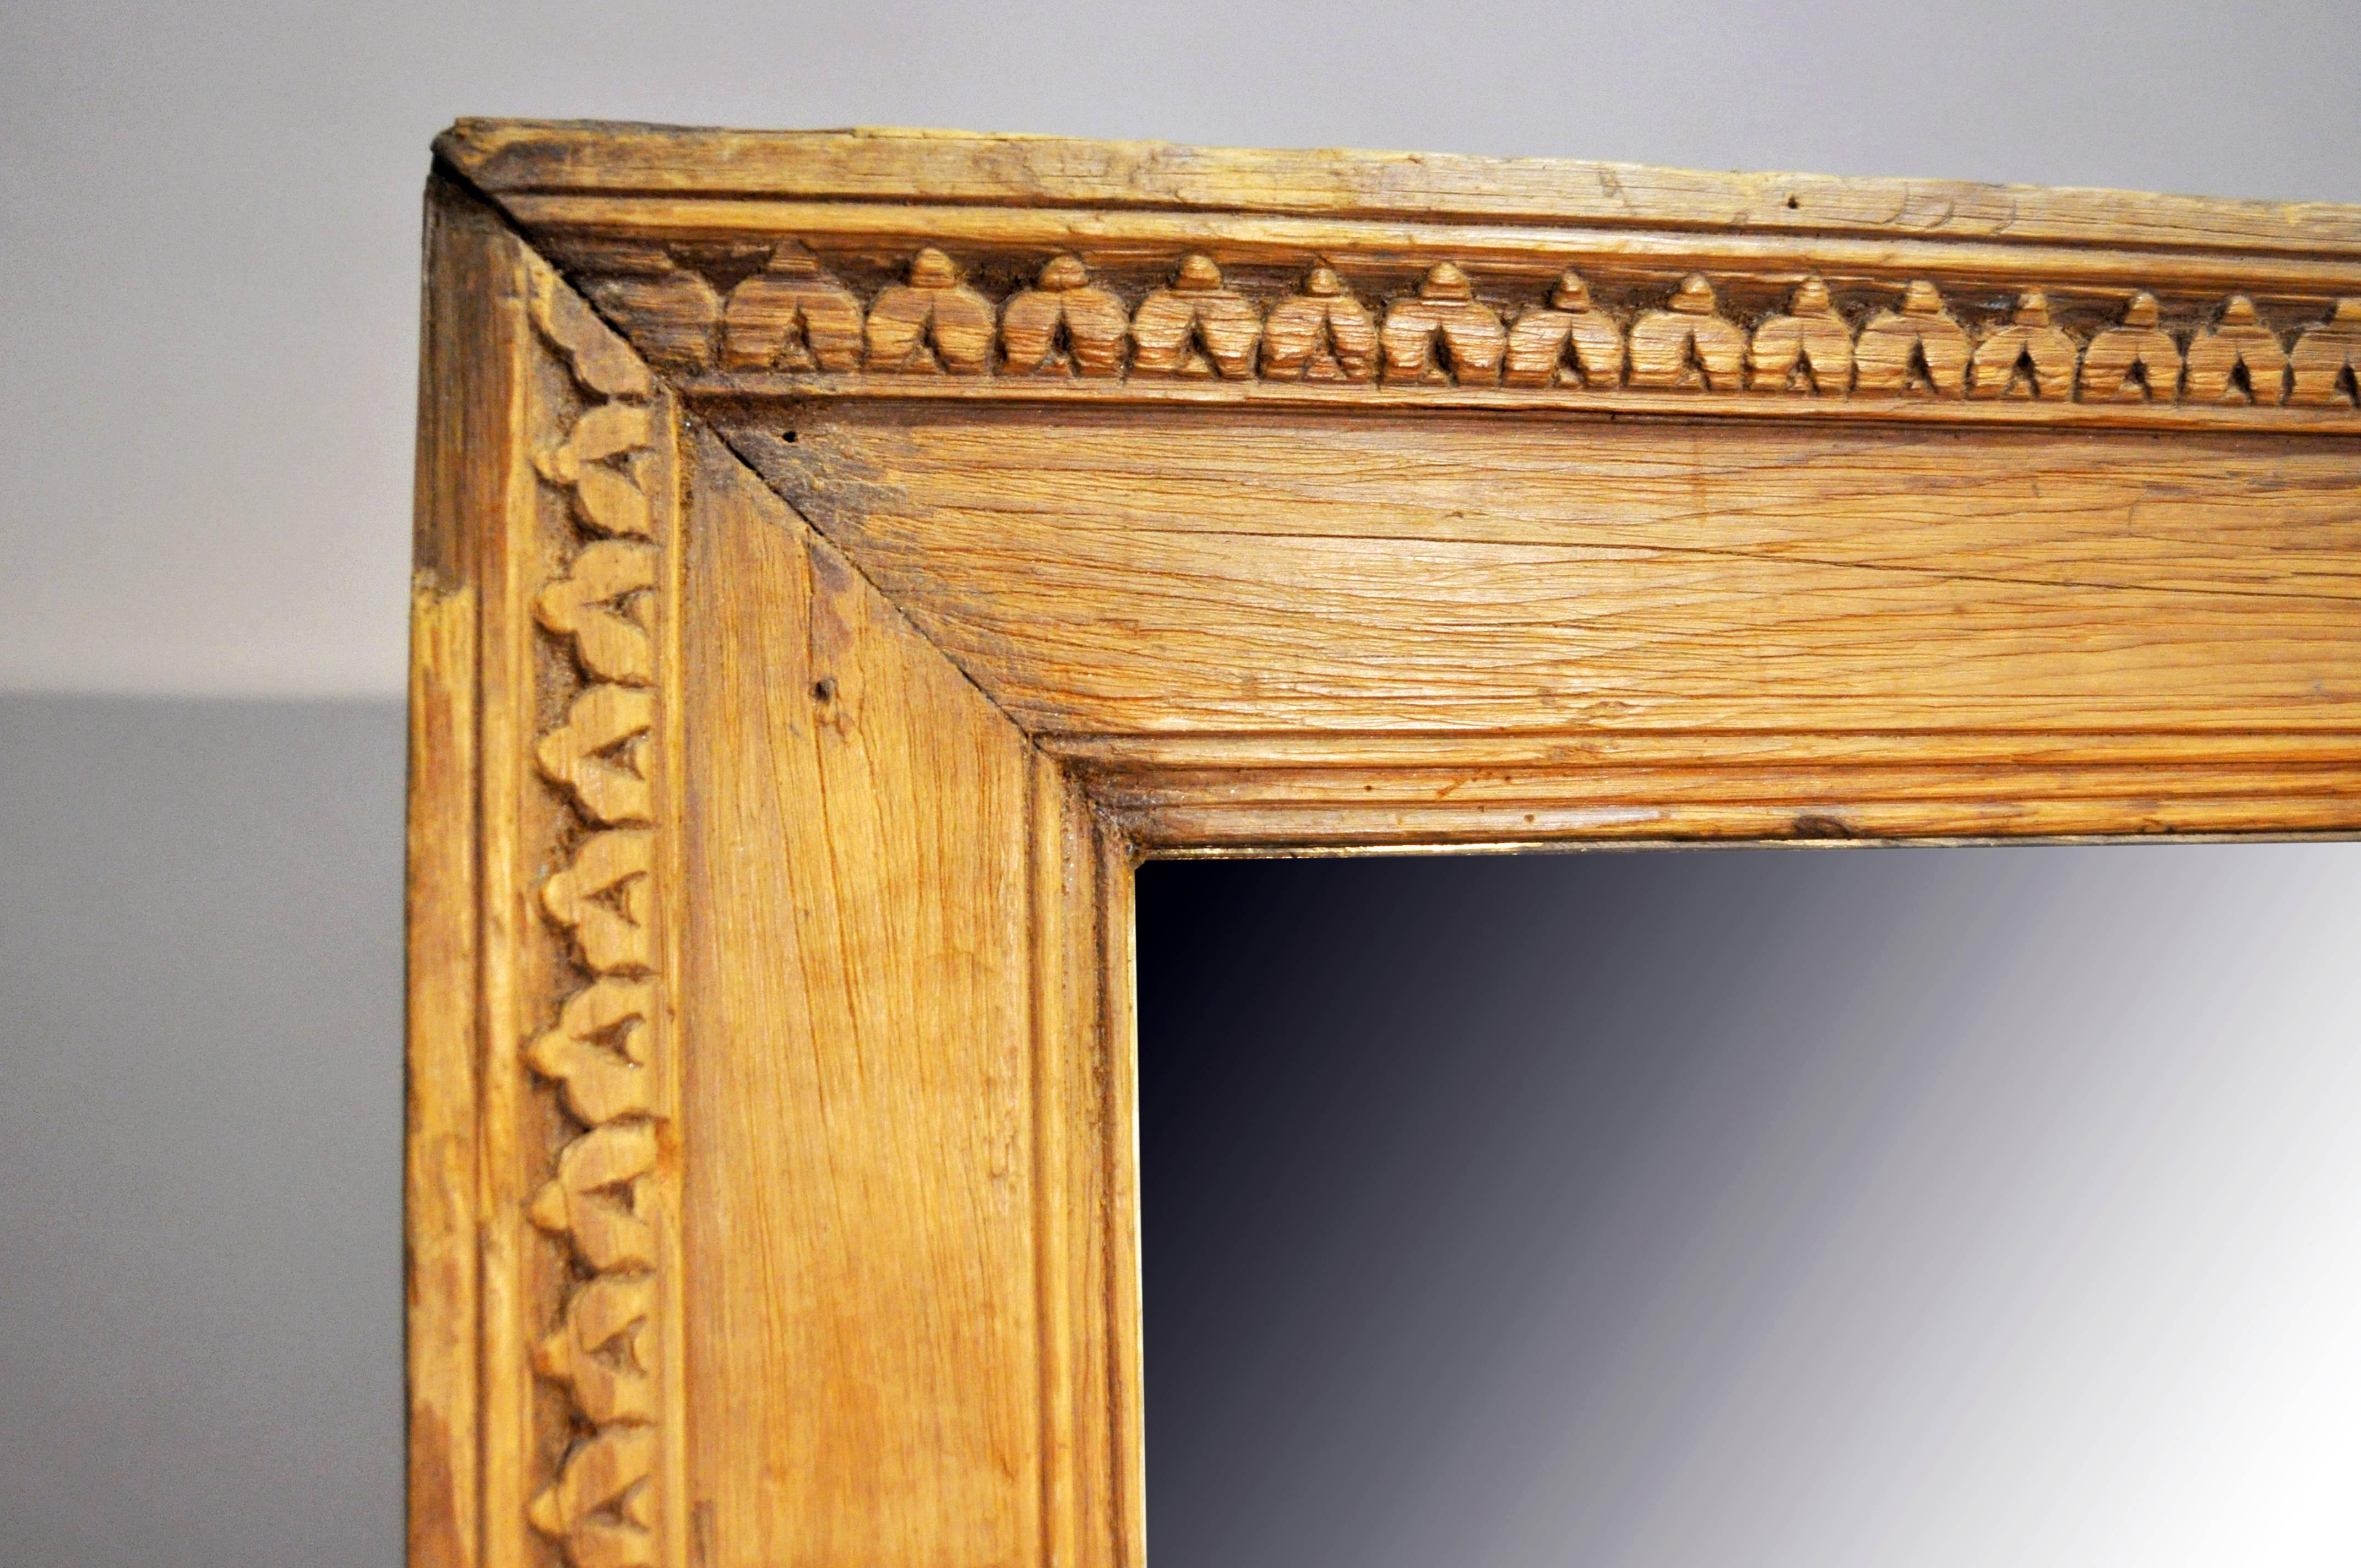 Natural and unfinished, the simple carved molding that frames the rectangular mirror plate is made from high-contrast grain.